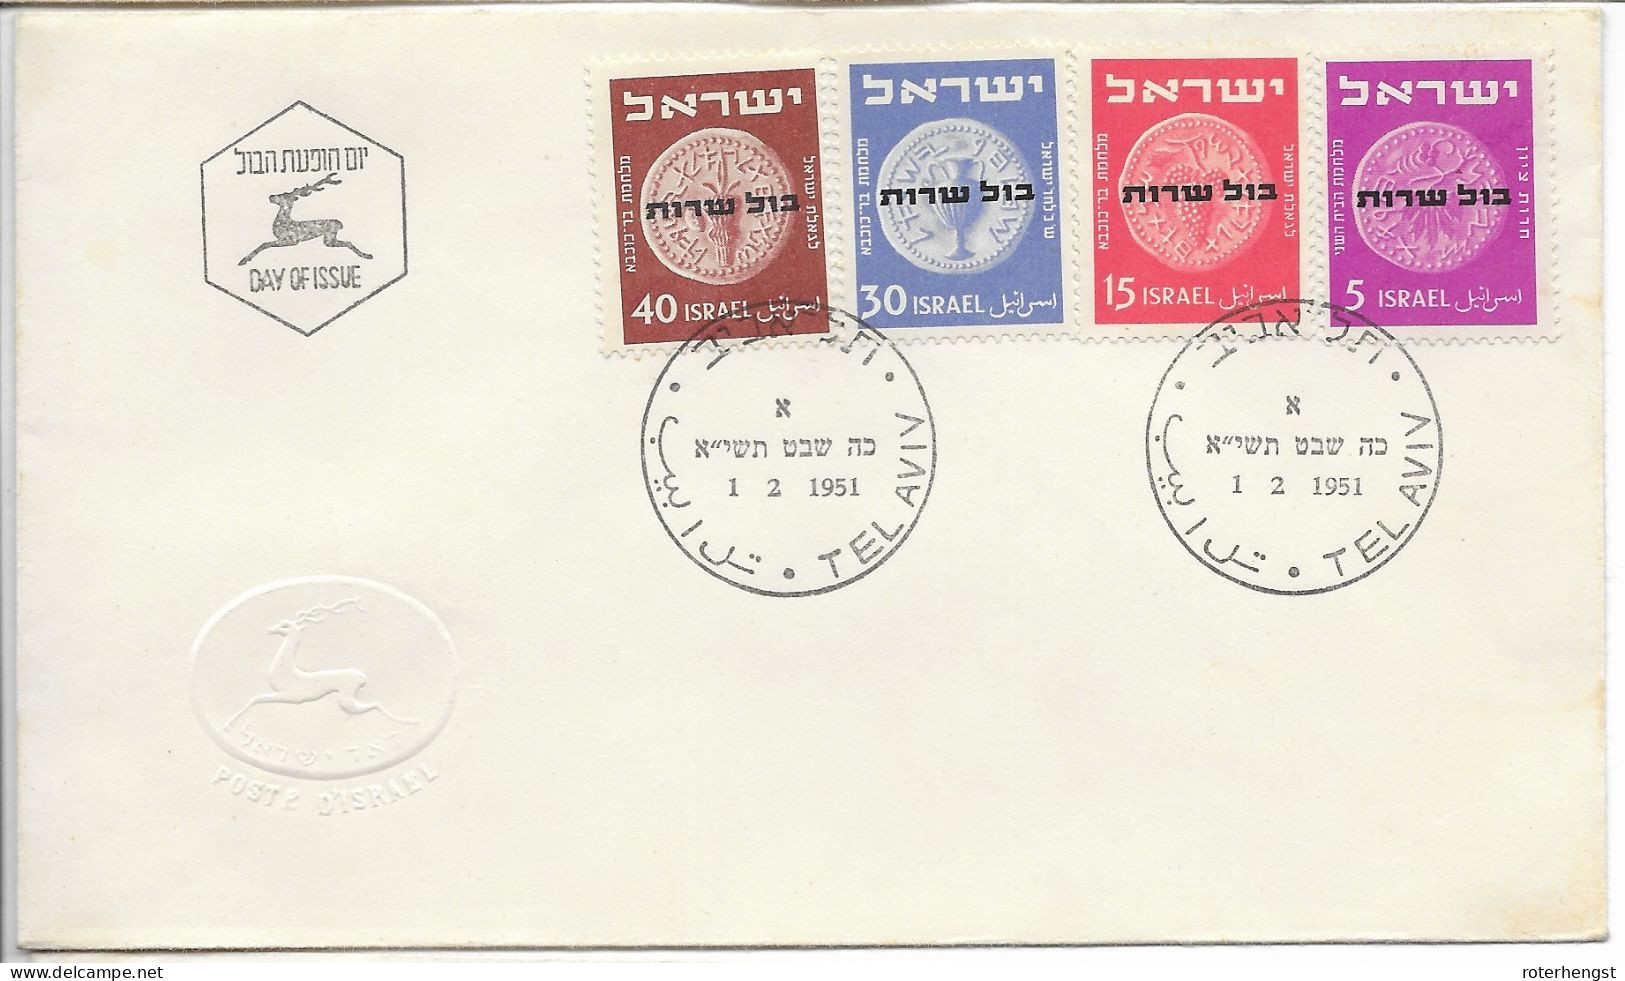 Israel FDC 1951 Postage Due - FDC